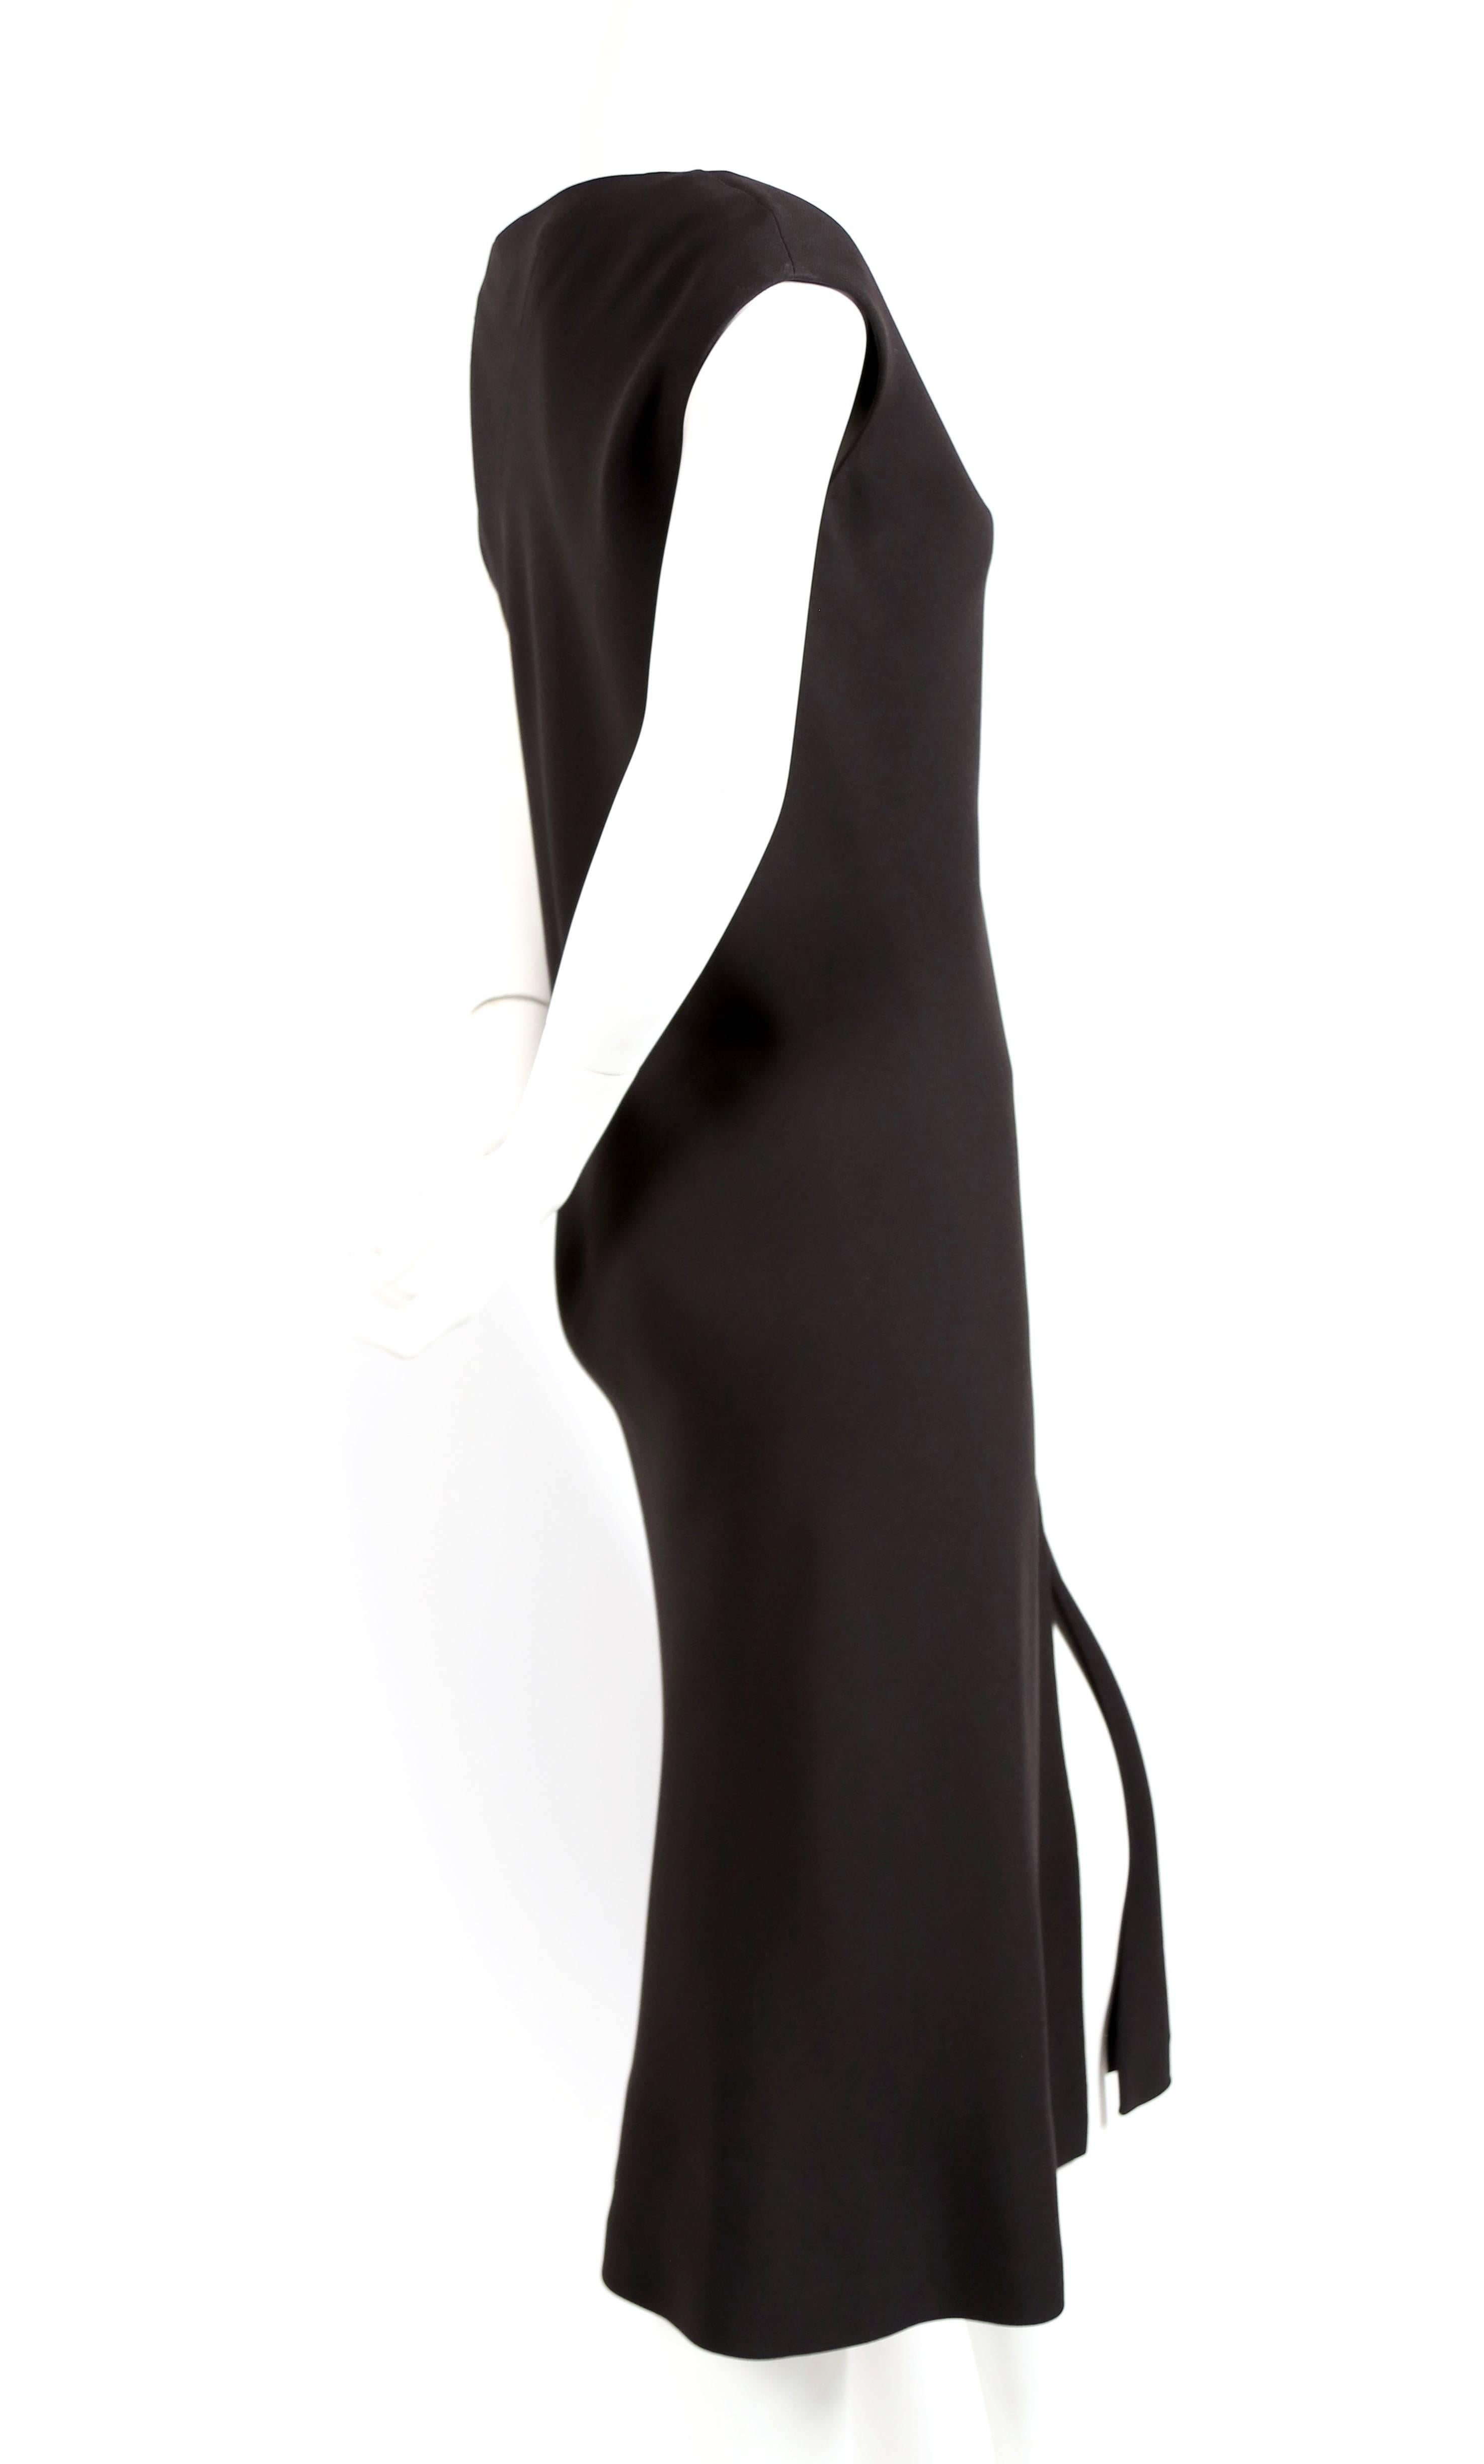 Jet black bias cut dress with high center front slit from Halston dating to the late 1970's. Fits a US 4-6. Approximate measurements are  34